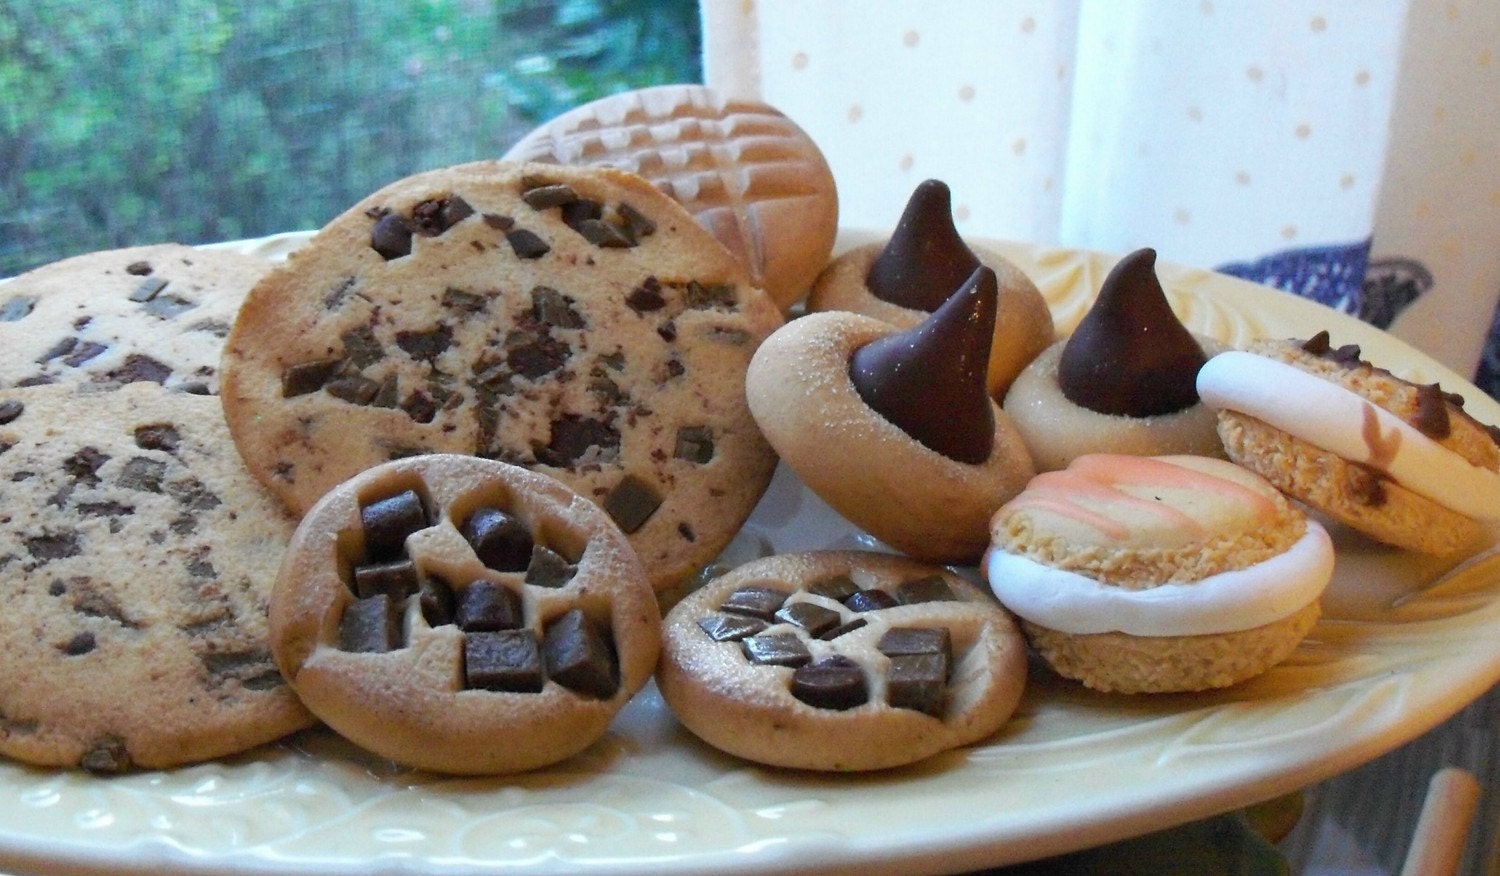 Polymer clay Cookies Decorative Assortment 12 Pc Props/Decor...Made to order